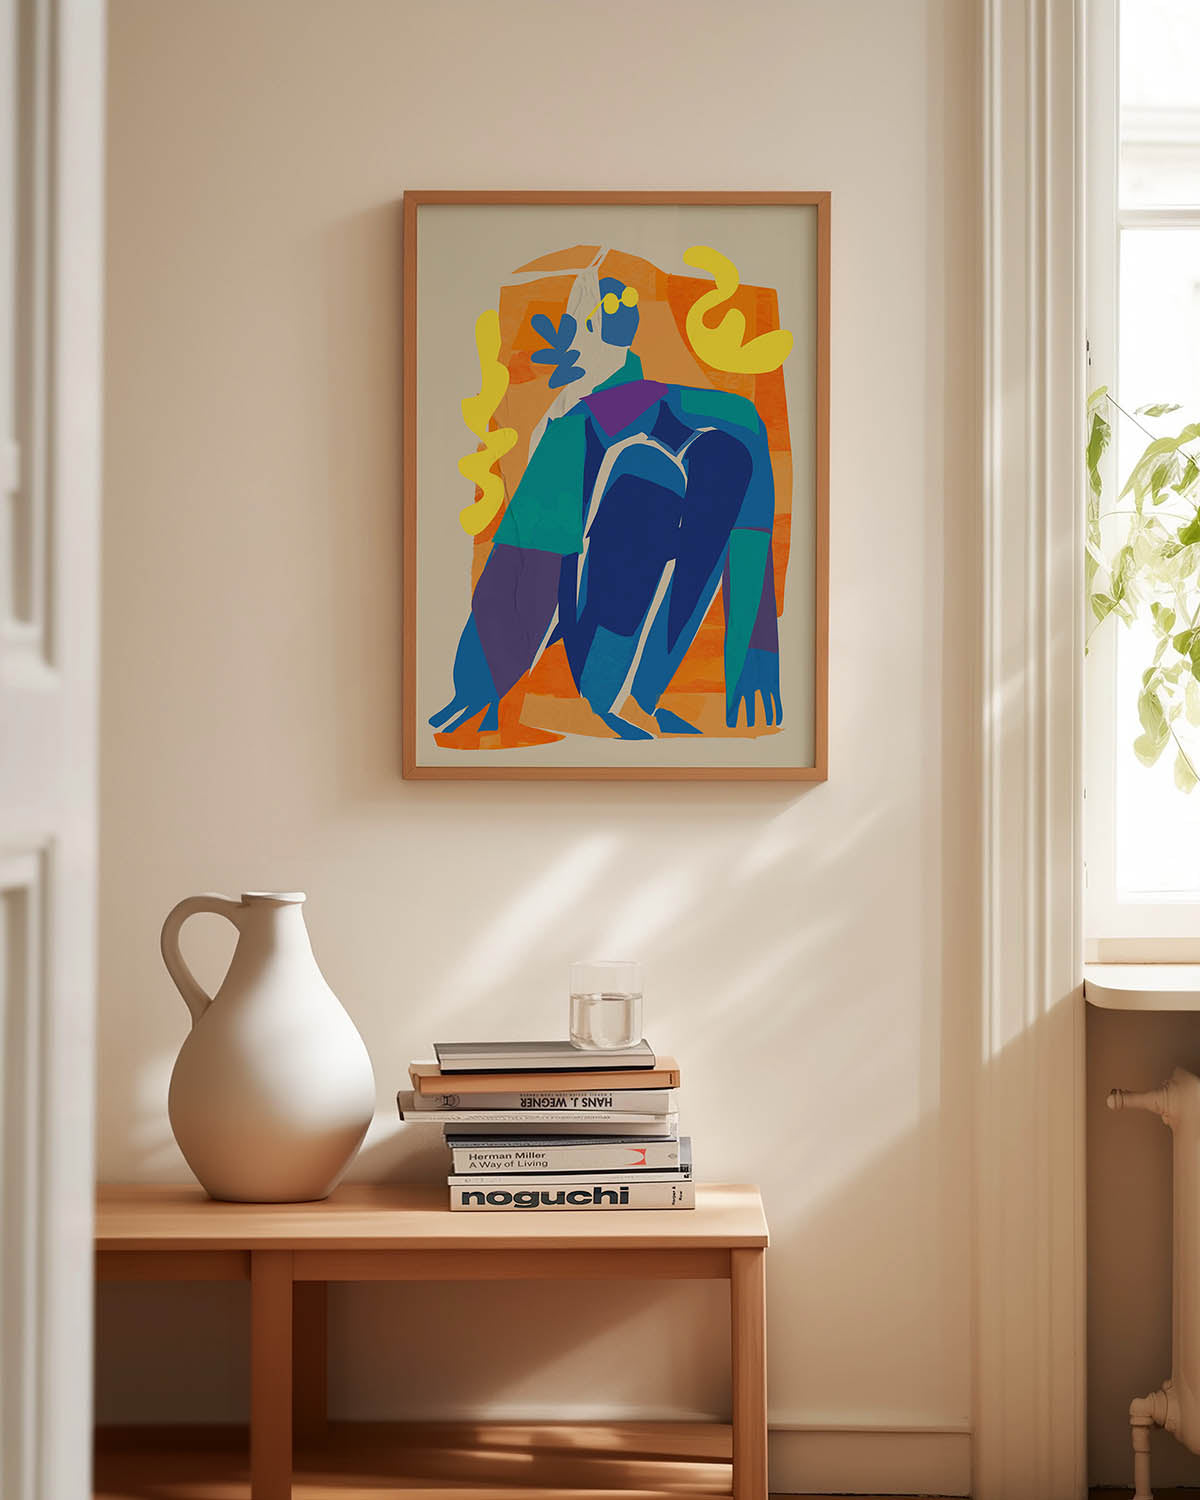 Abstract art poster with vibrant cutout shapes in blue, green, yellow, and orange, depicting a stylized figure in a dynamic pose against a muted background, perfect for modern home decor